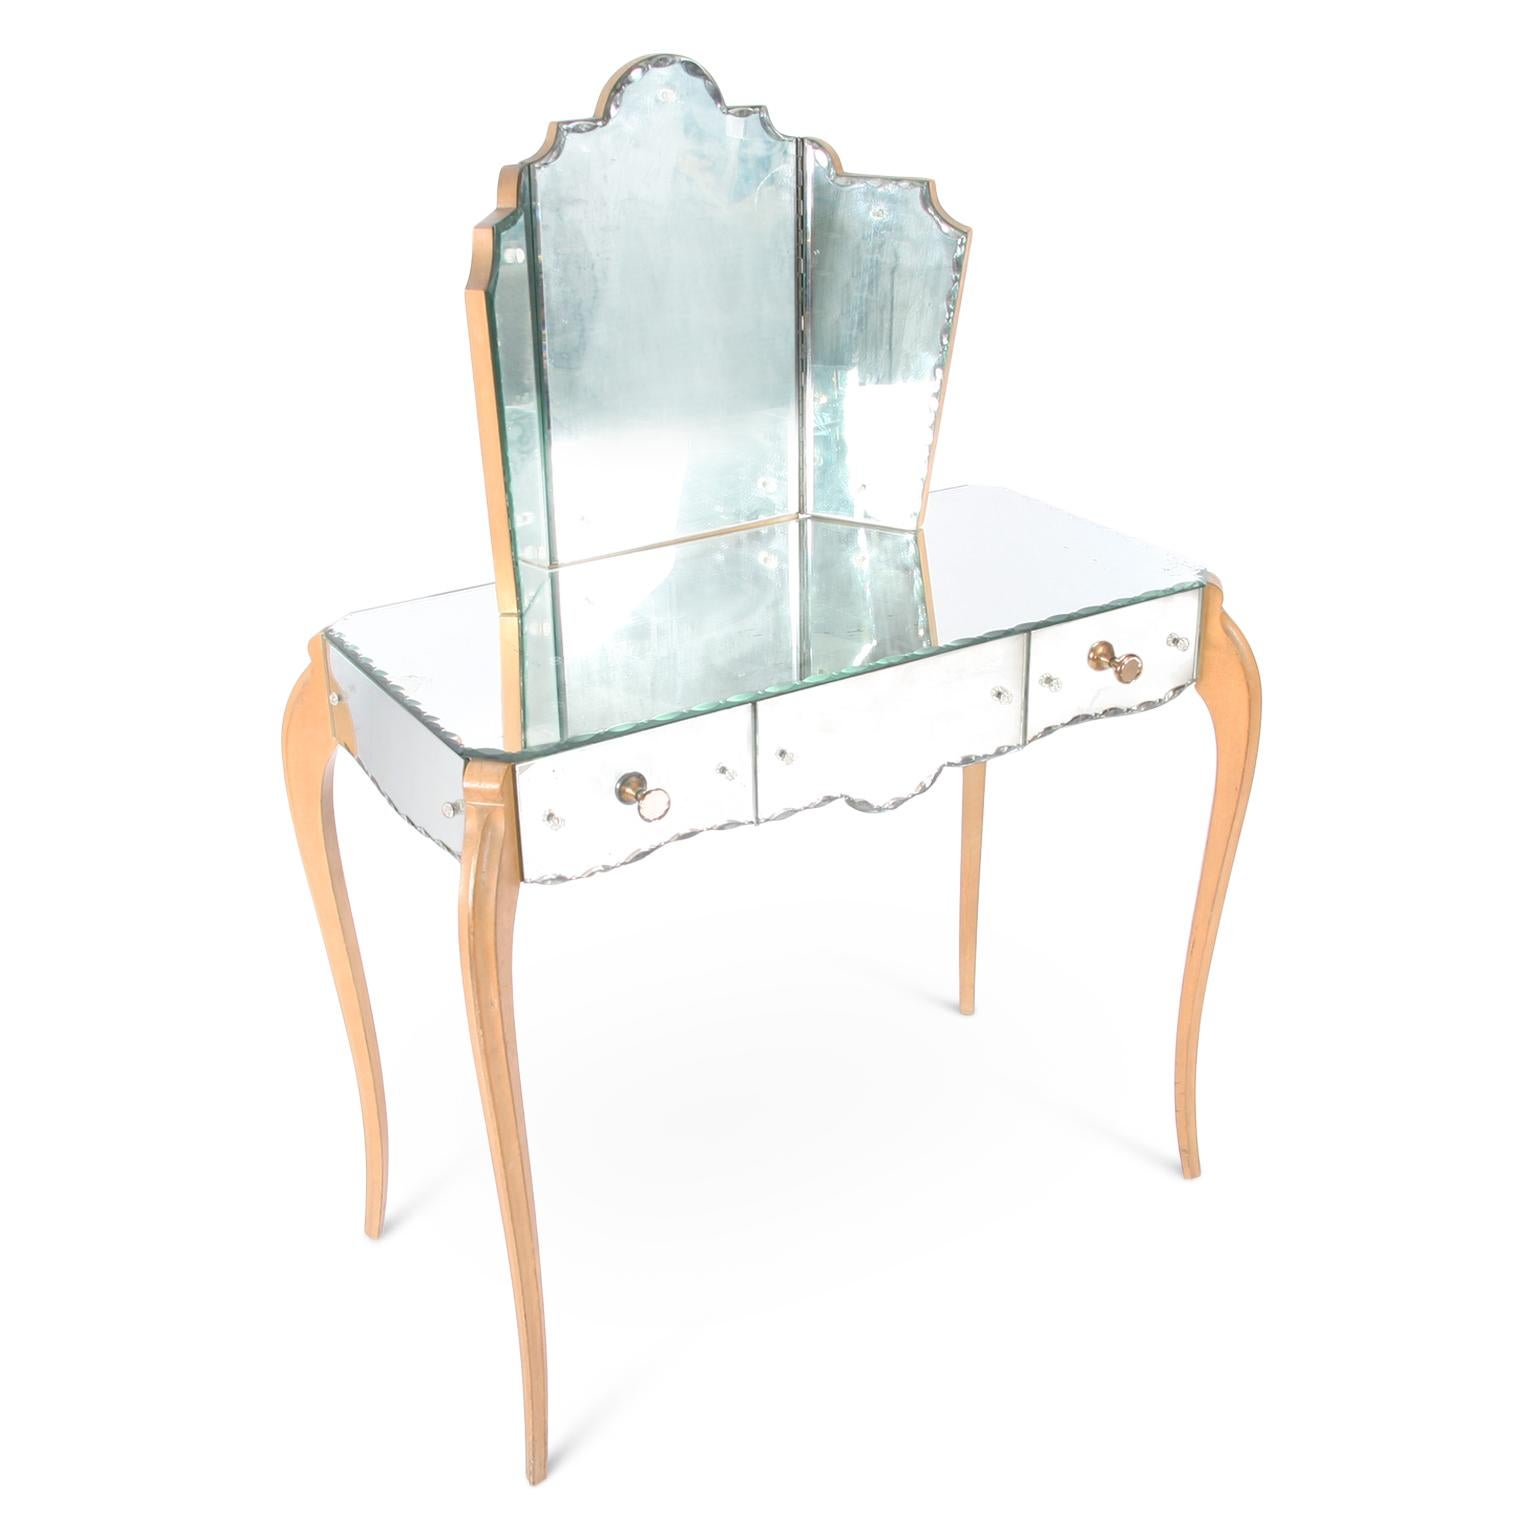 This elegant mirror dressing table, with polished beech legs, original glass, a triptych mirror and copper and glass handles, dates back to mid-20th century, France.